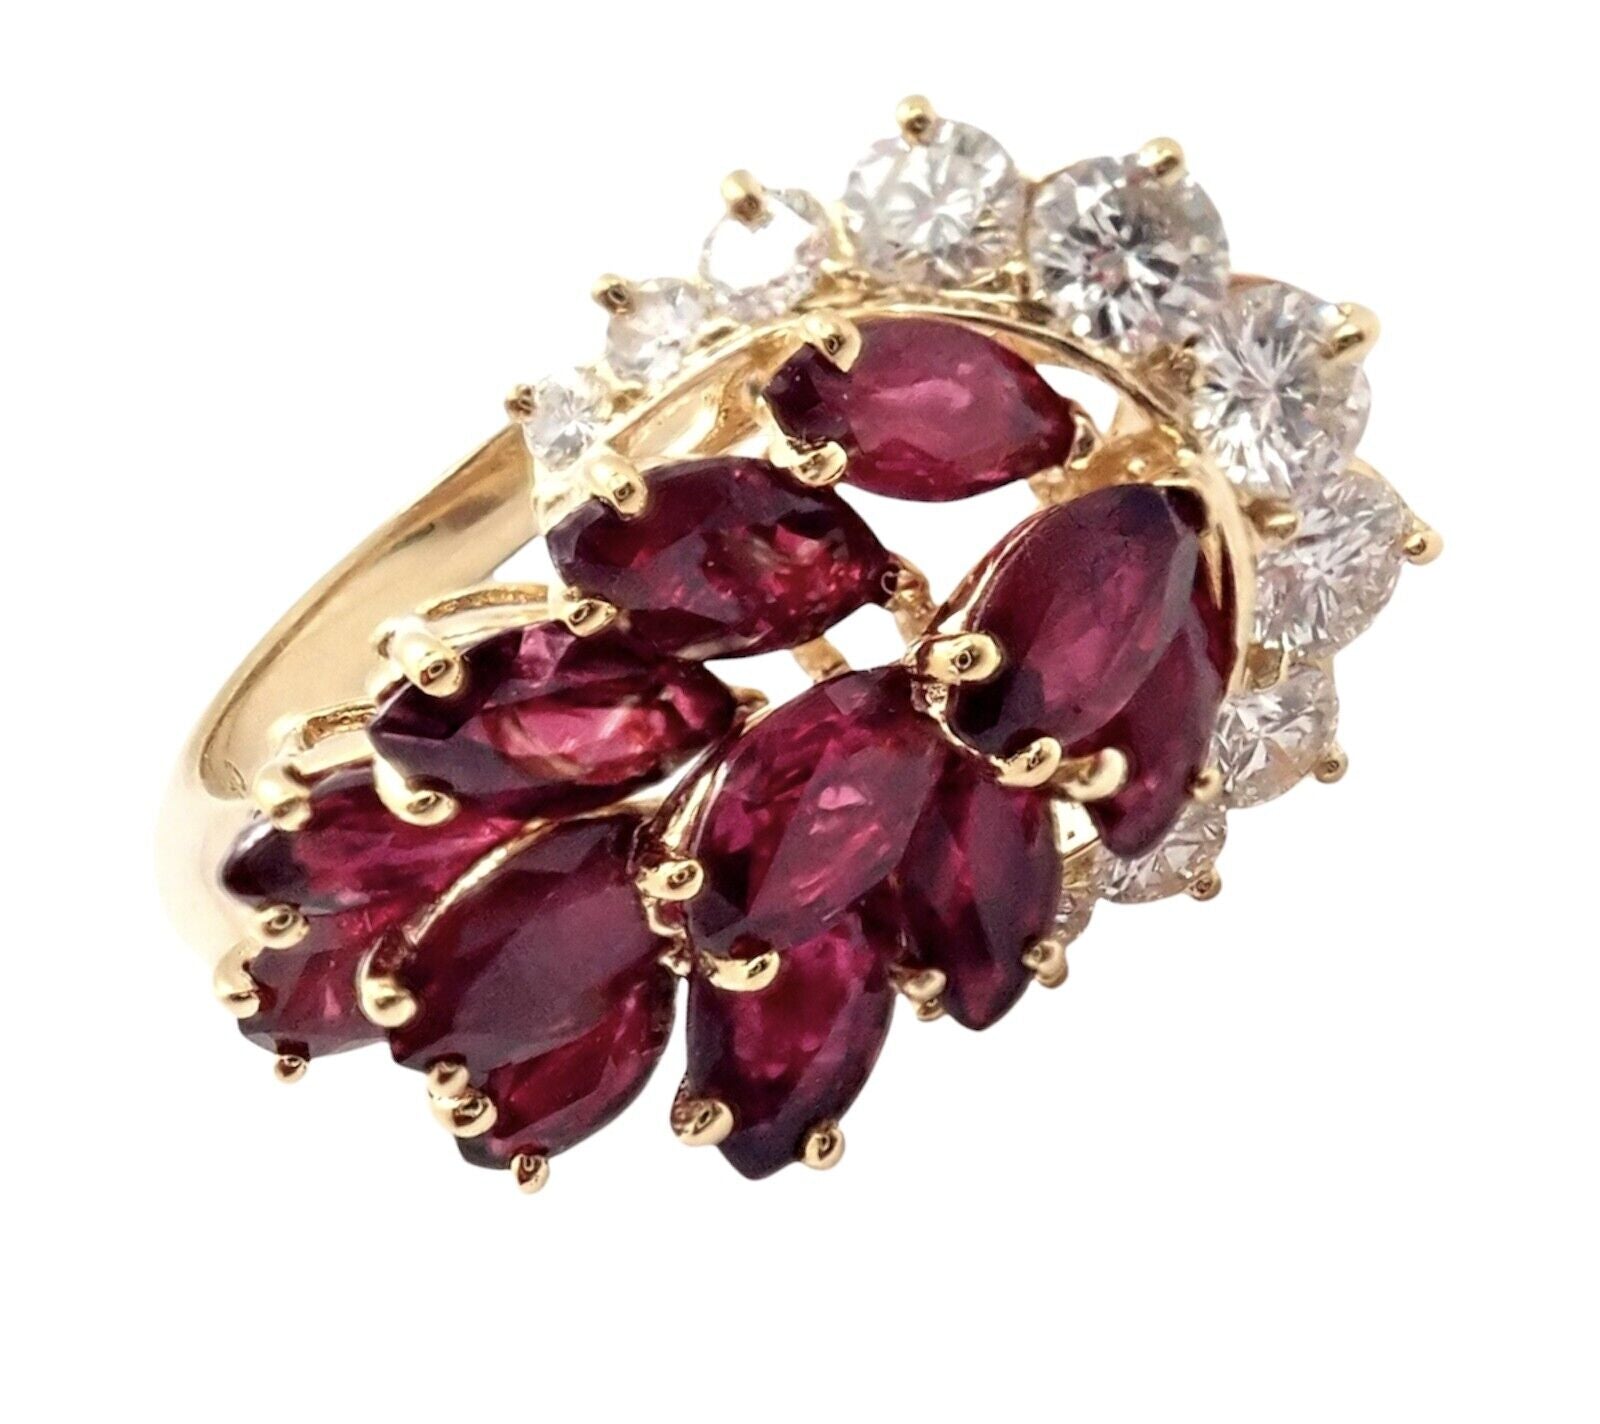 Rare! Authentic Piaget 18K Yellow Gold Diamond Ruby Cocktail Ring